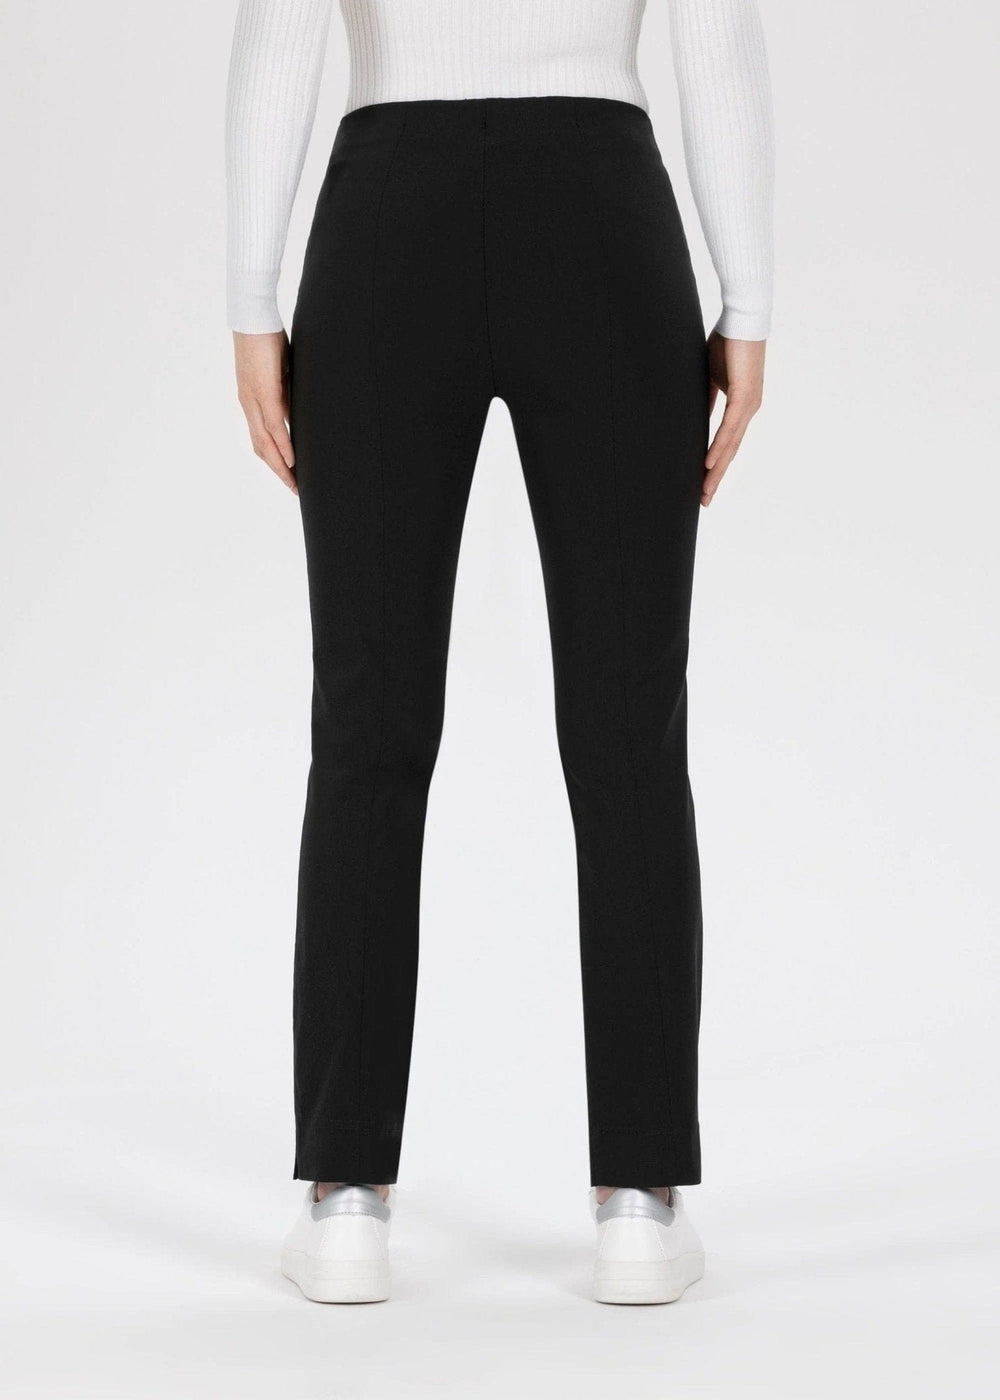 Stehmann Ina Pull On Trousers In Black - Crabtree Cottage